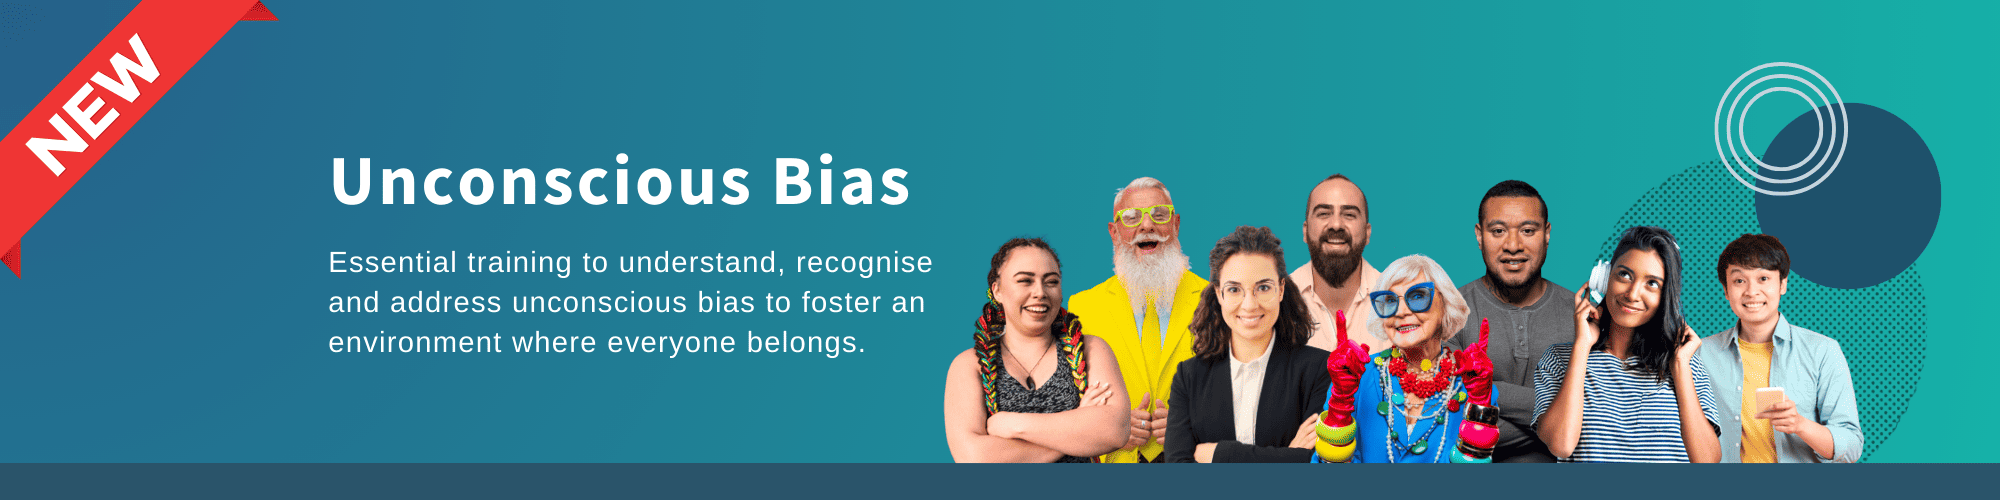 a group of diverse people over a gradient background and "Unconscious Bias" title